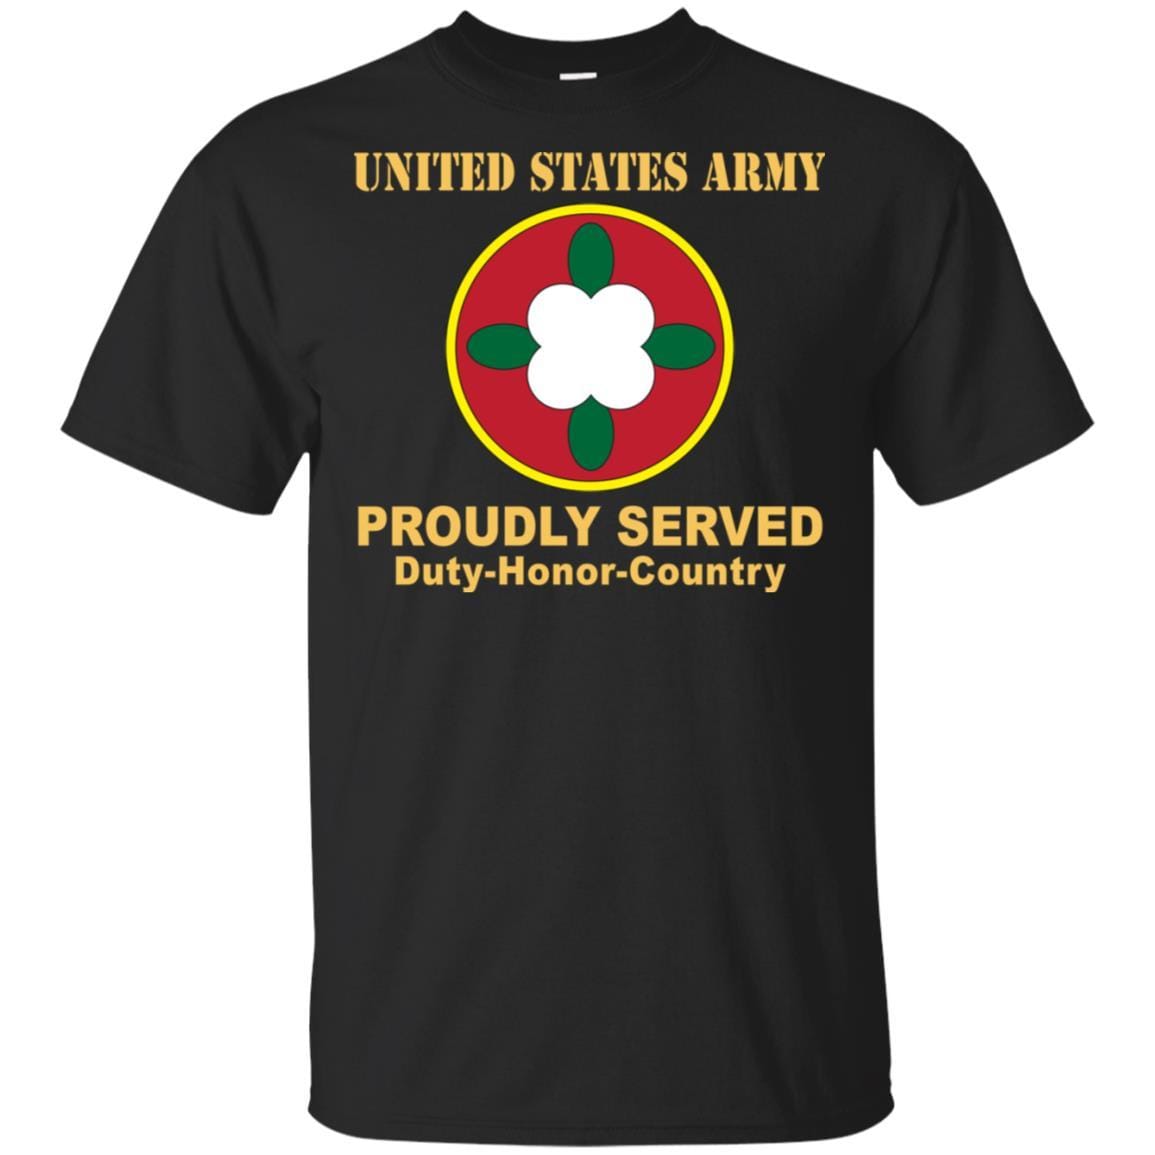 US ARMY 184TH SUSTAINMENT COMMAND- Proudly Served T-Shirt On Front For Men-TShirt-Army-Veterans Nation